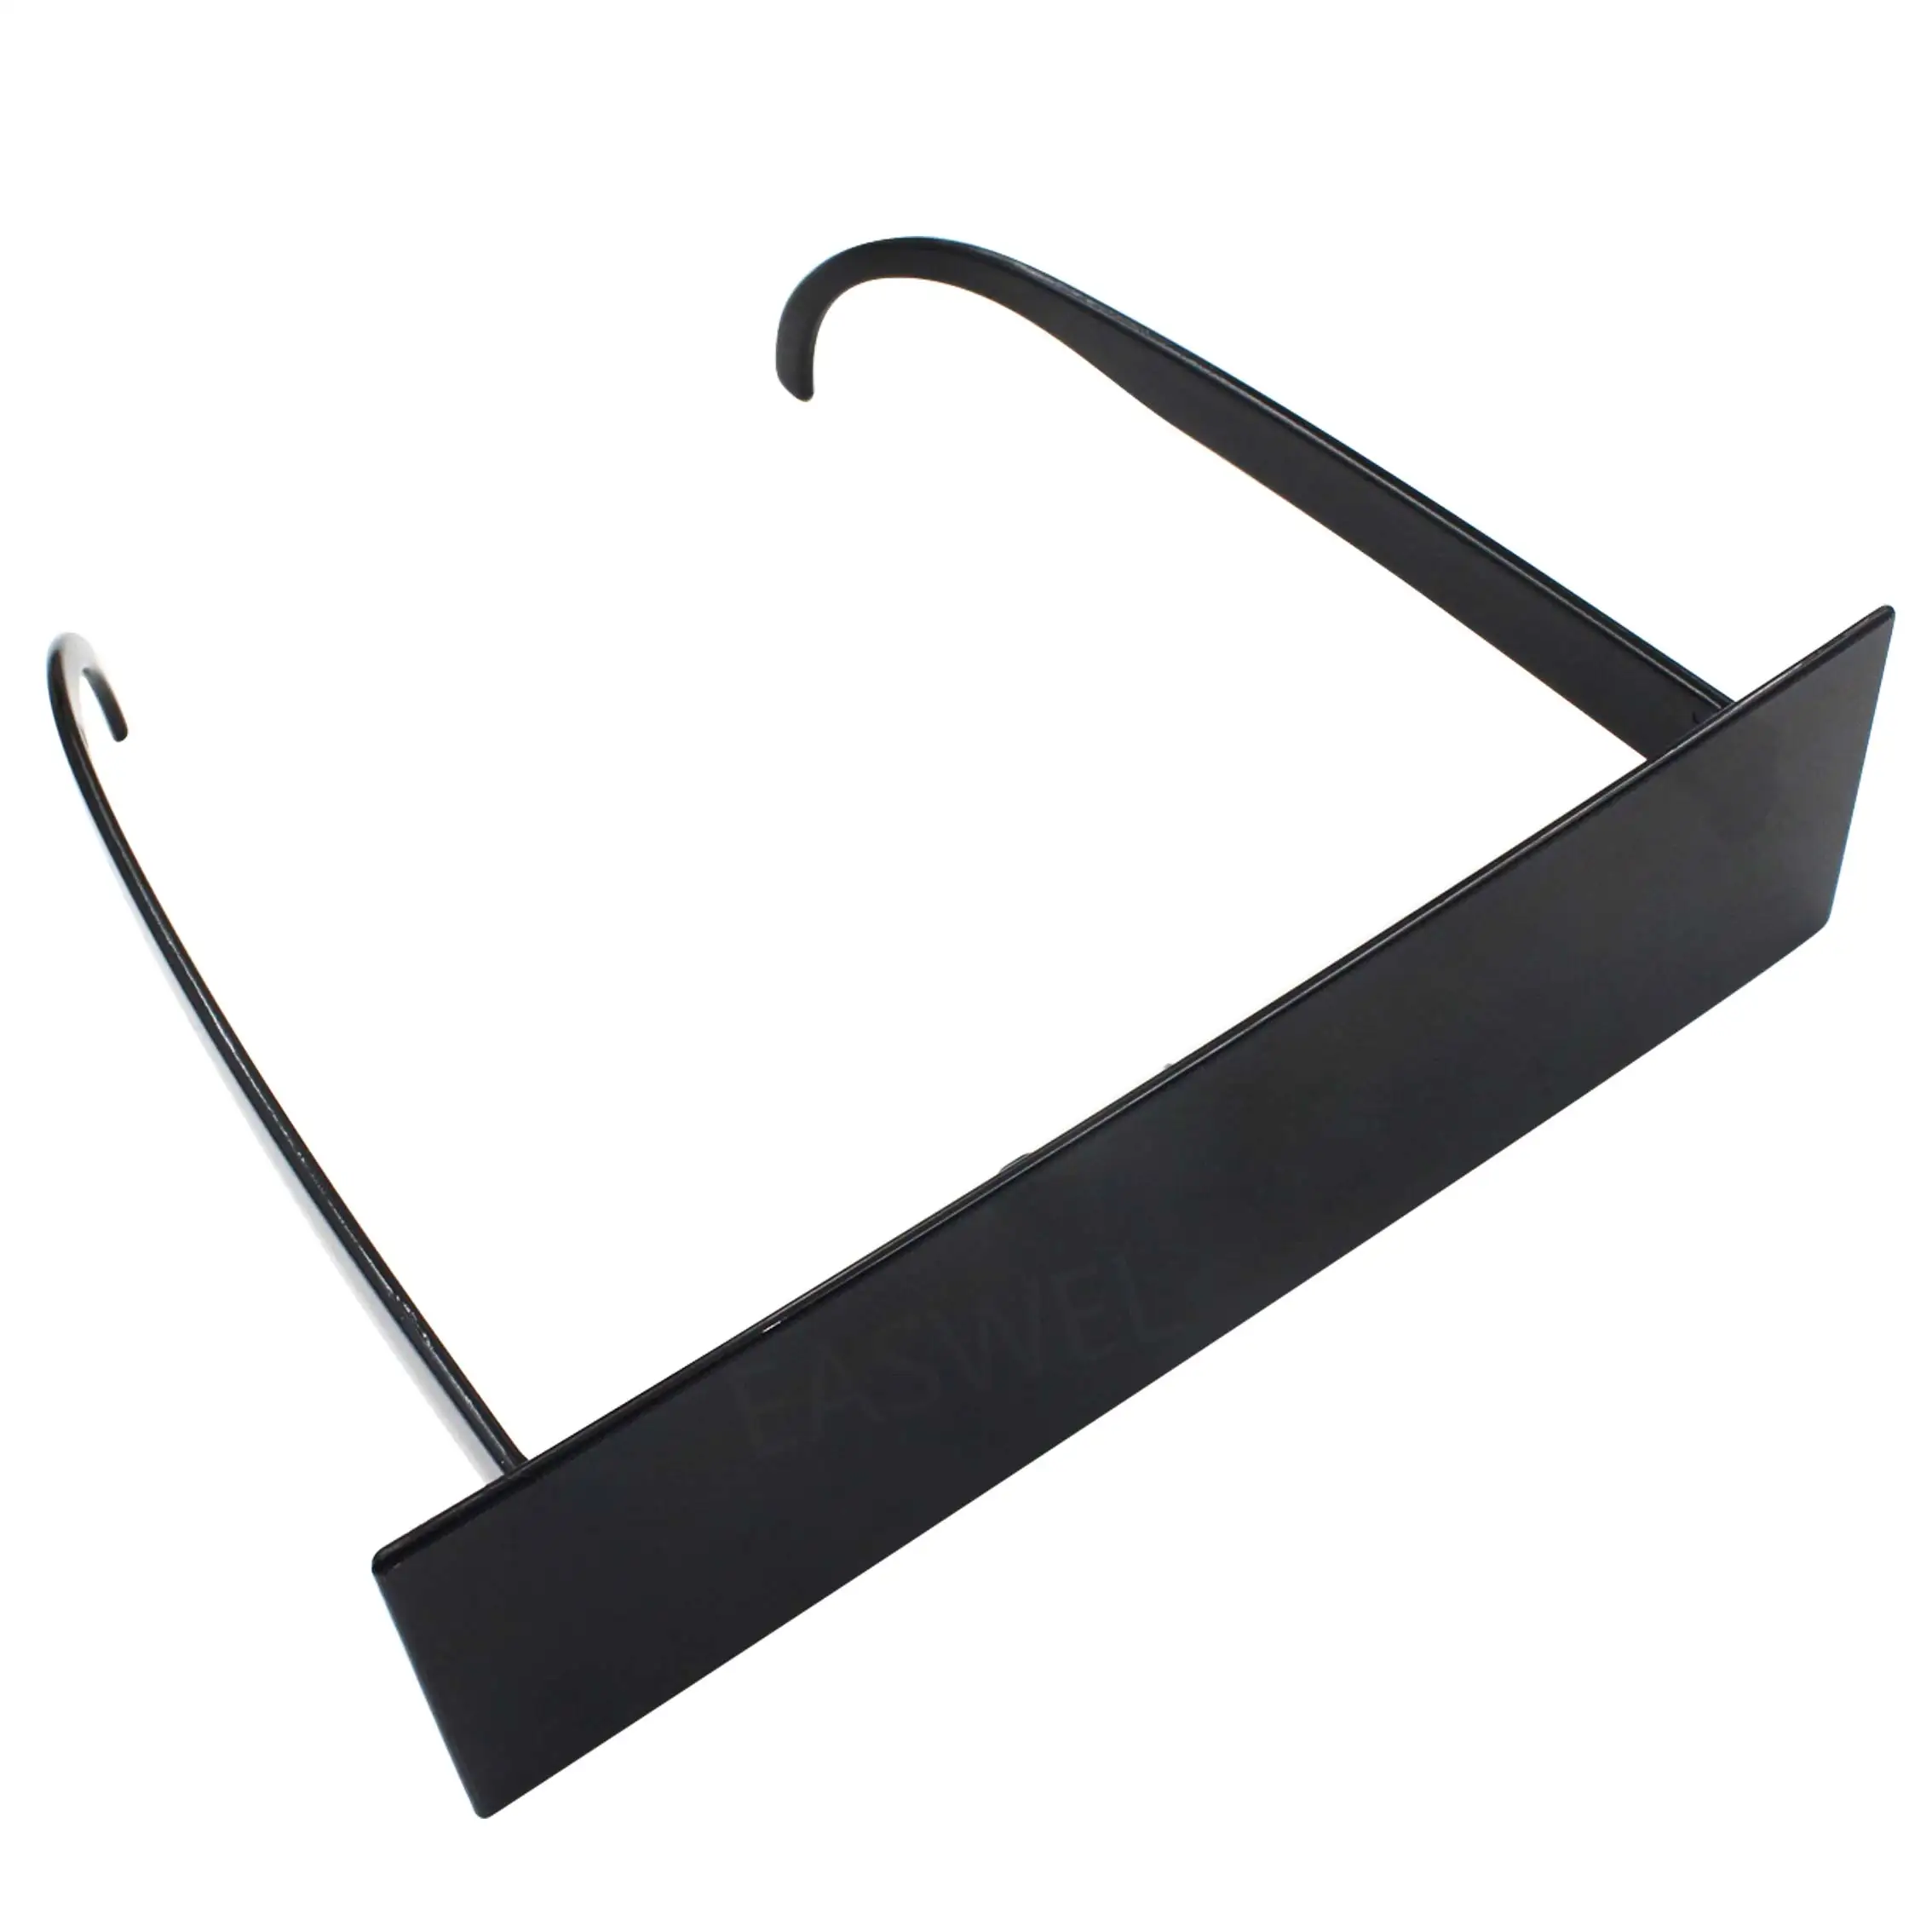 Censorship One Piece Black Bar Internet Sunglasses Costume Xmas Party Cosplay Buy Sunglasses Party Cosplay Xmas Product On Alibaba Com